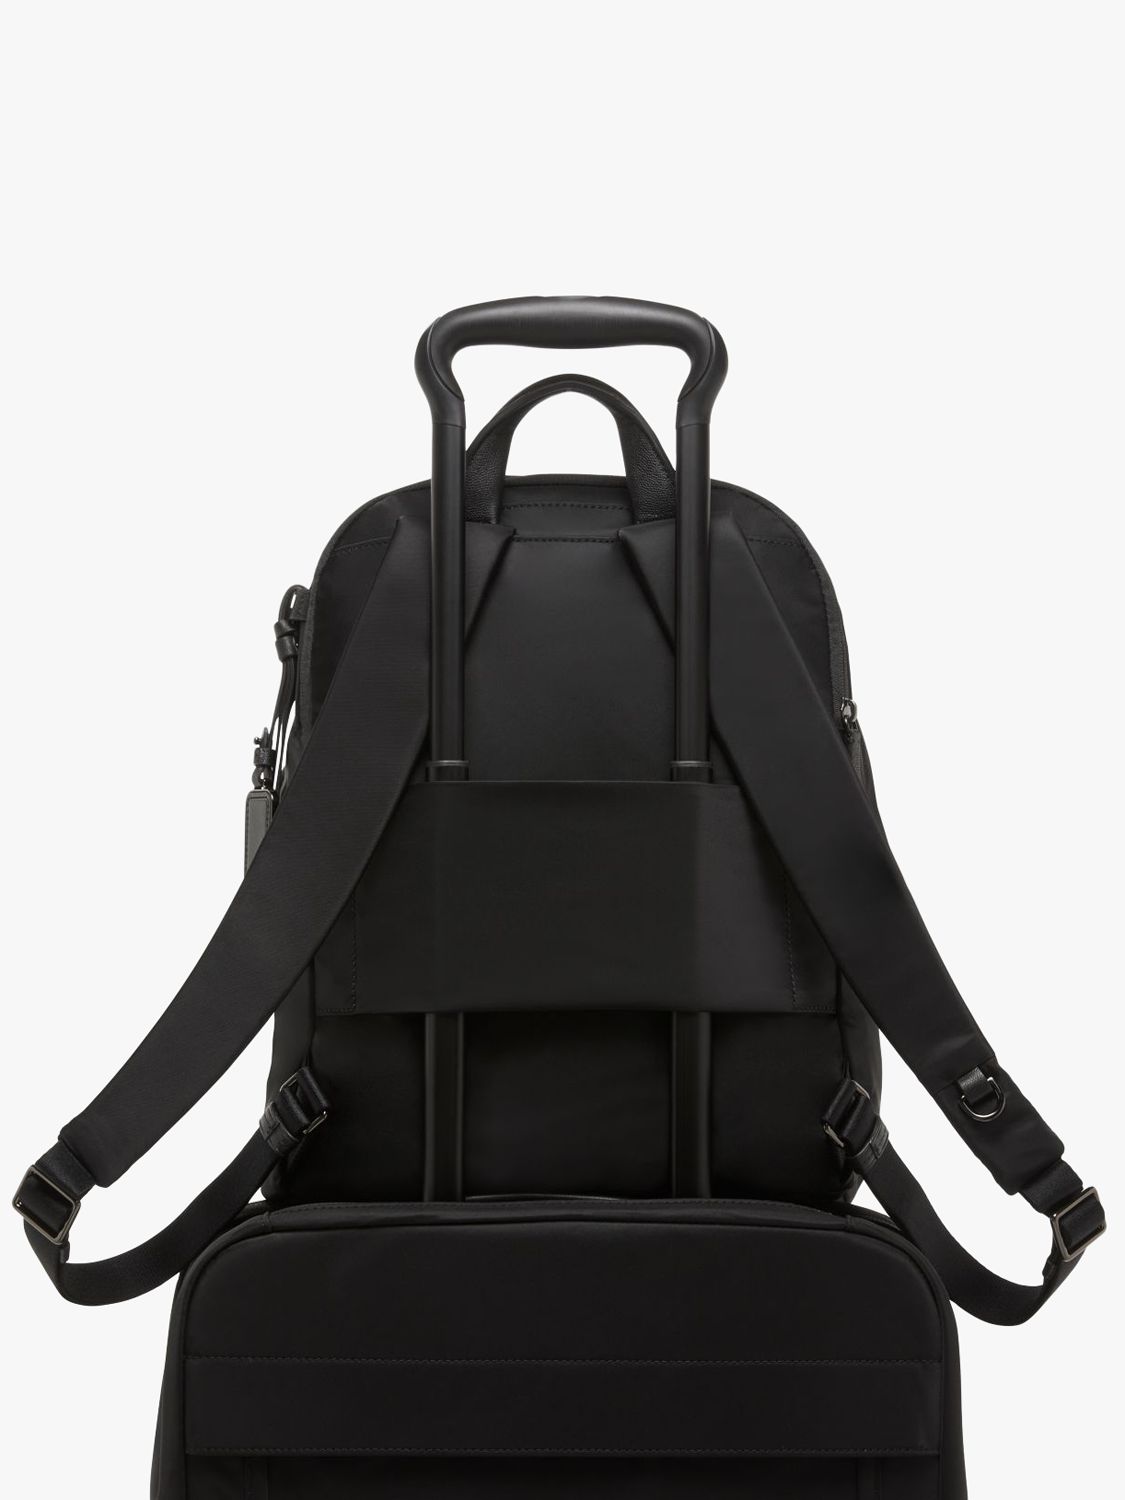 TUMI T-Tech Network Lightweight Luggage Collection